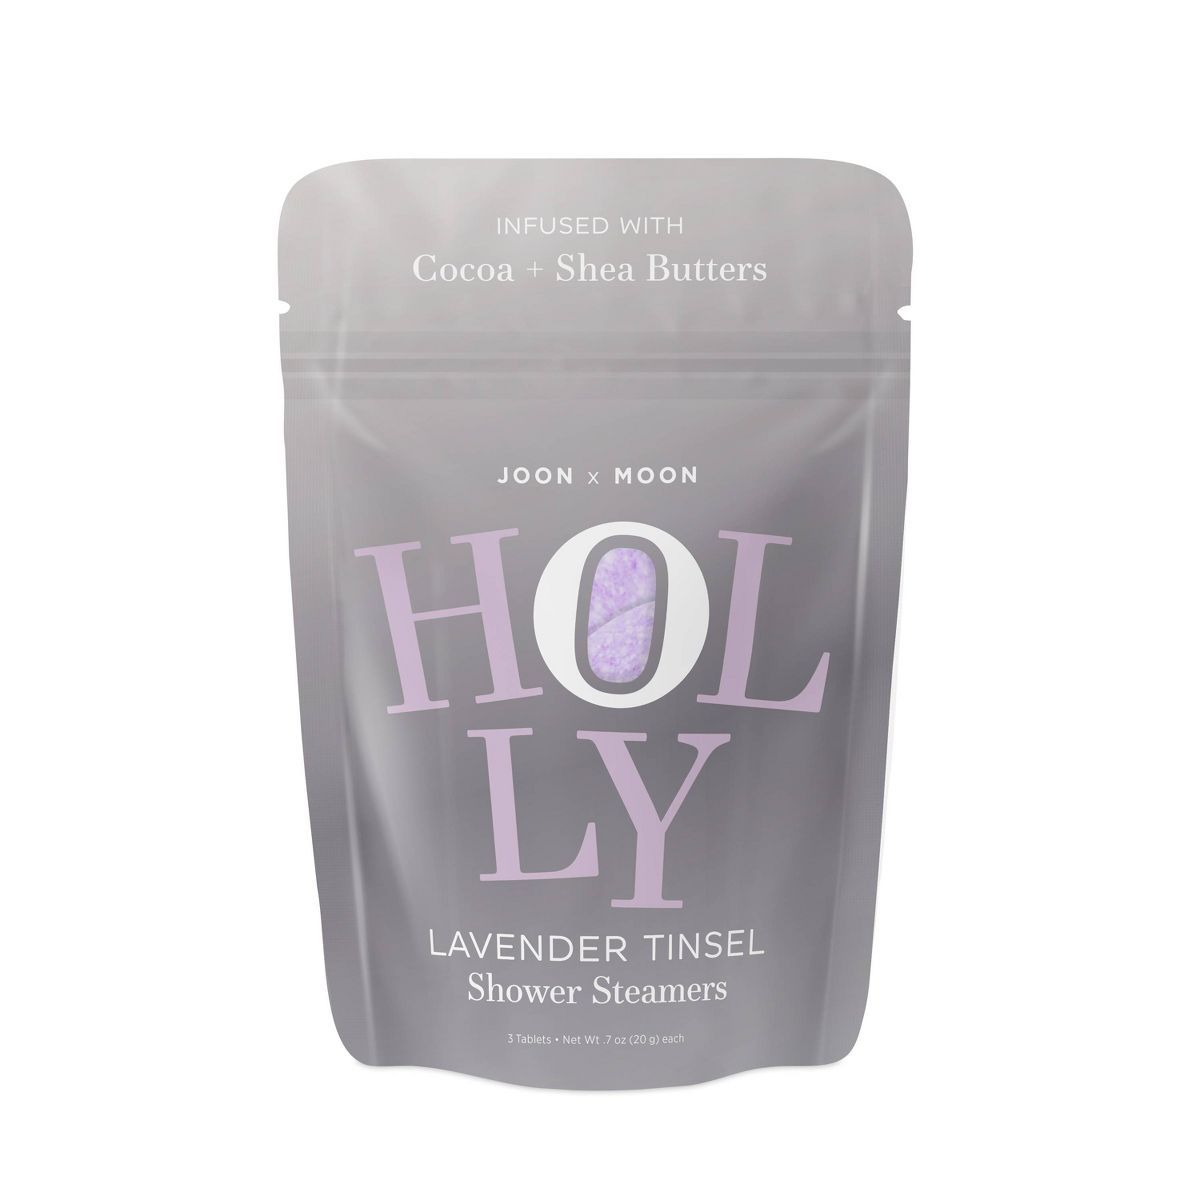 Joon X Moon Holly Lavender Shower Steamers - 3ct | Target